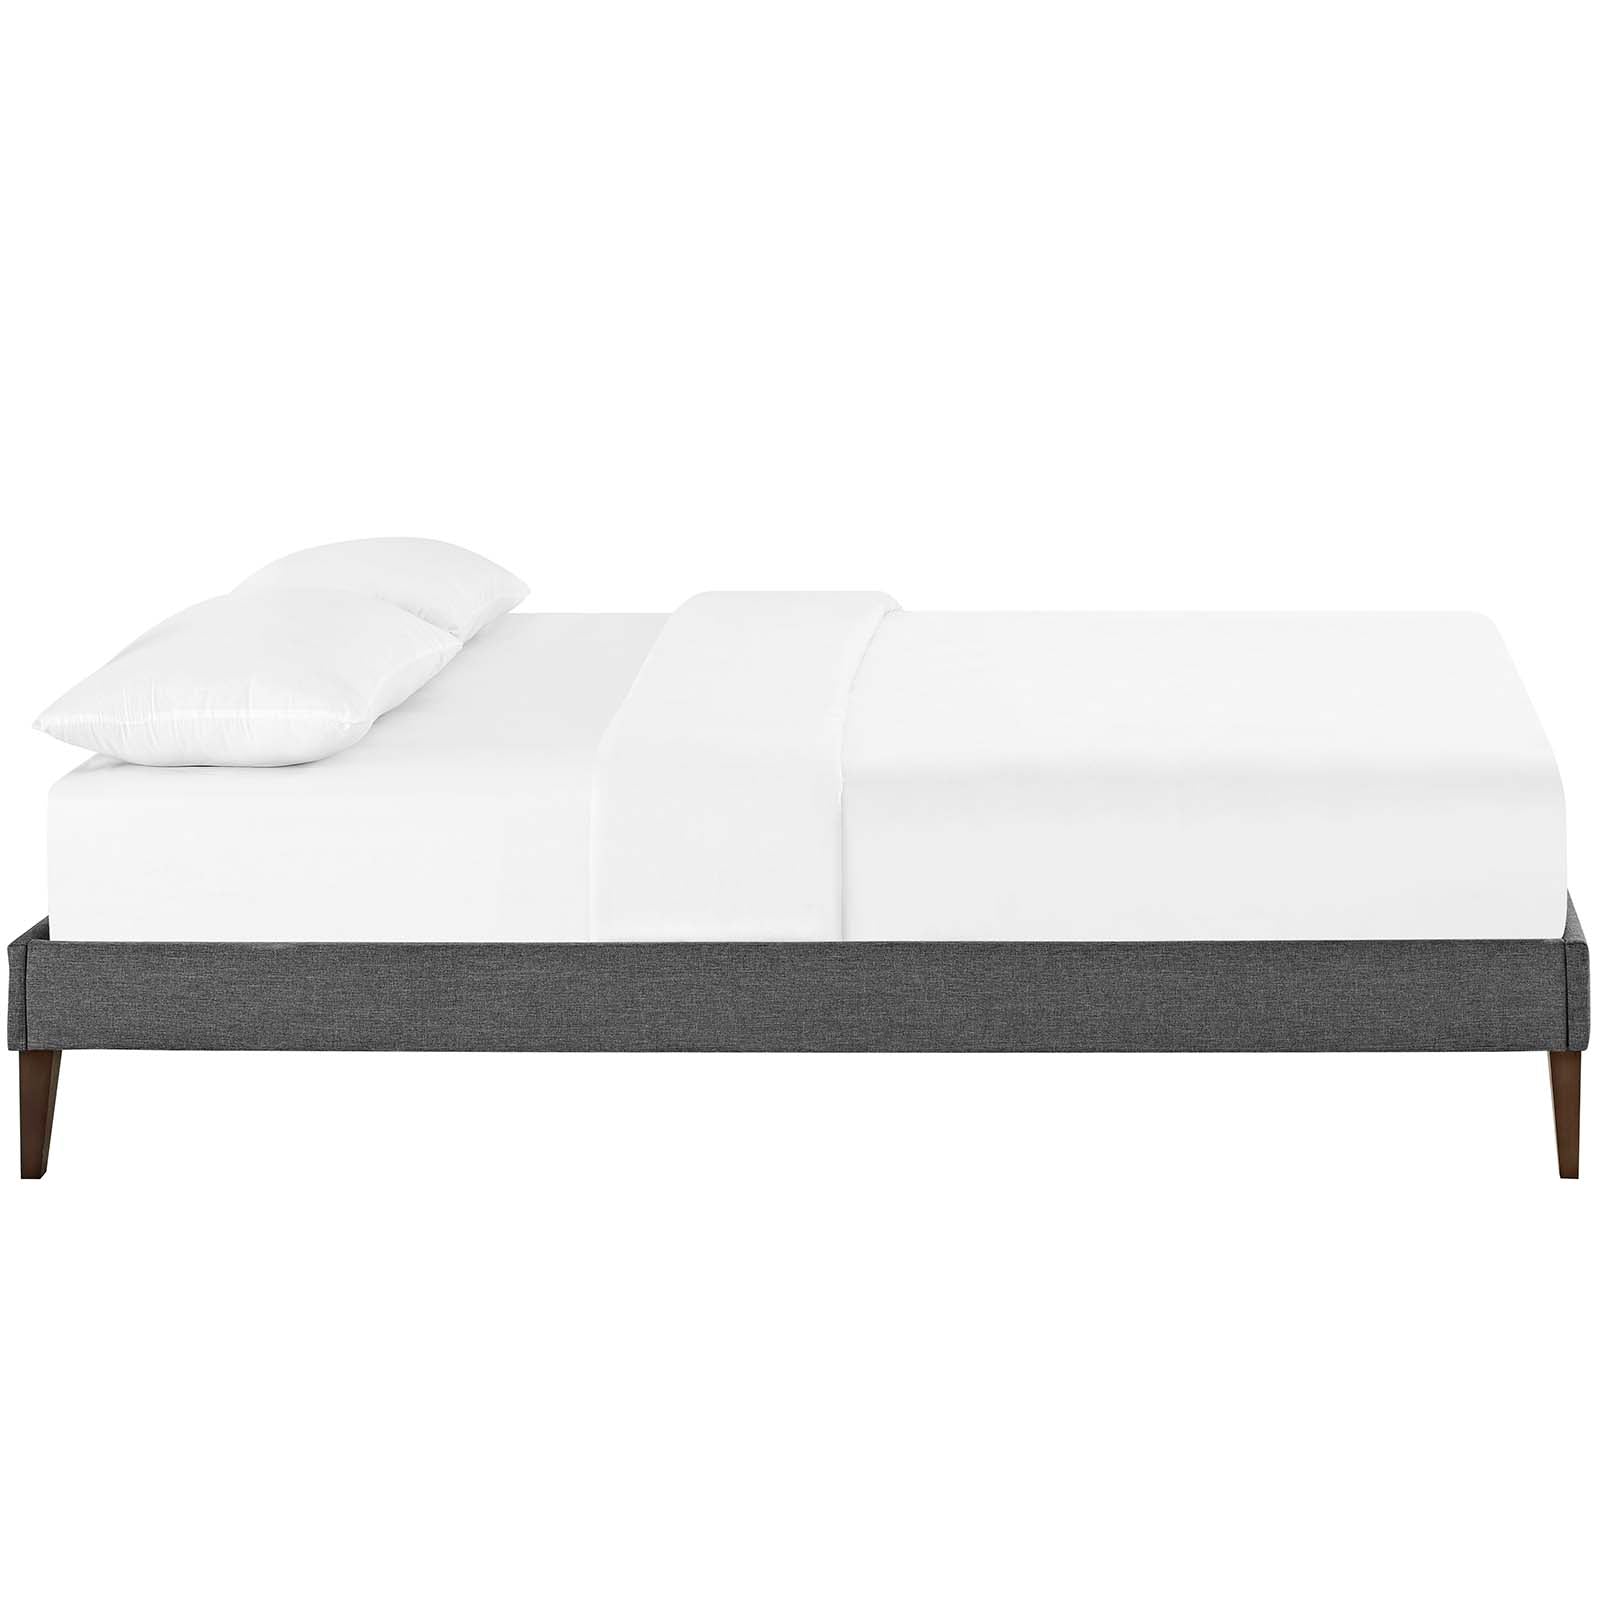 Tessie Full Fabric Bed Frame with Squared Tapered Legs